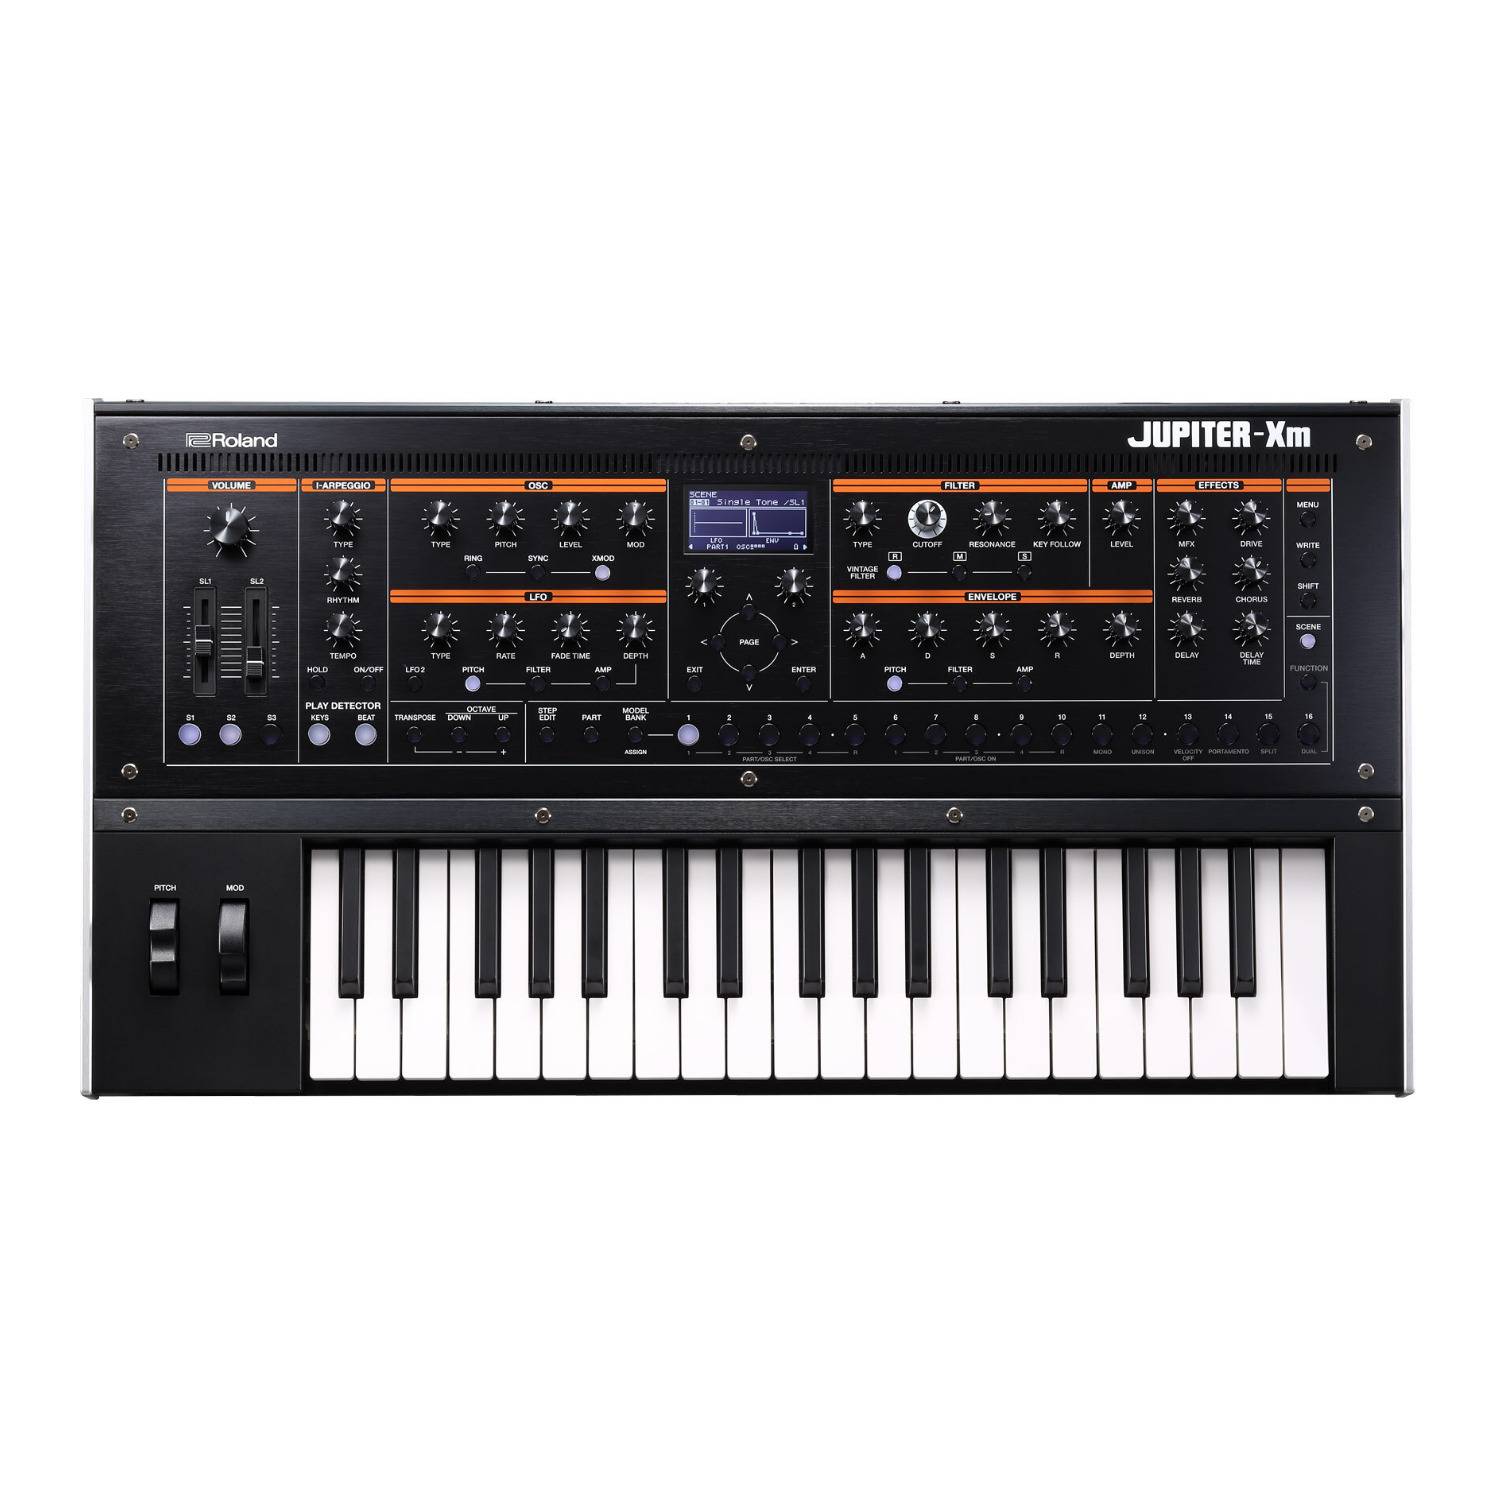 Roland JUPITER-XM 37-Note Slim Keyboard Synthesizer with Bluetooth MIDI and Wireless Connectivity